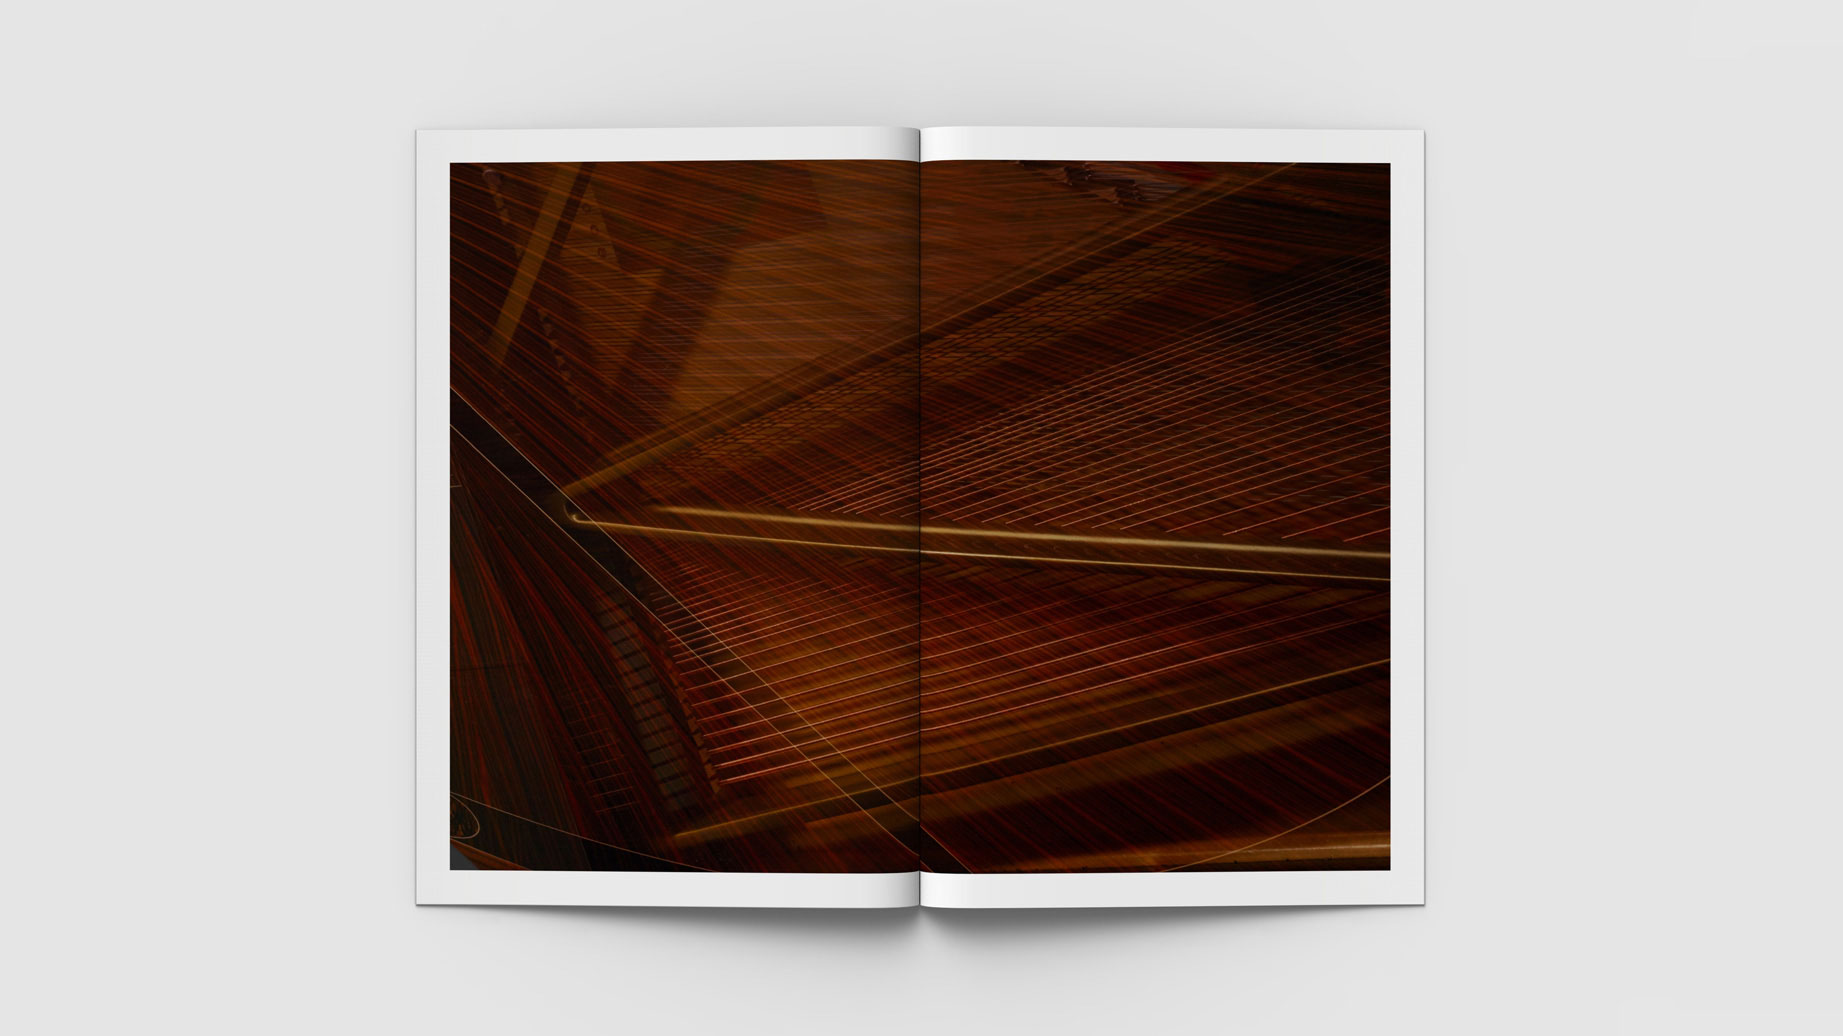 Steinway and Sons, 1 in 100,000 Limited Edition Book Spread, Editorial Design